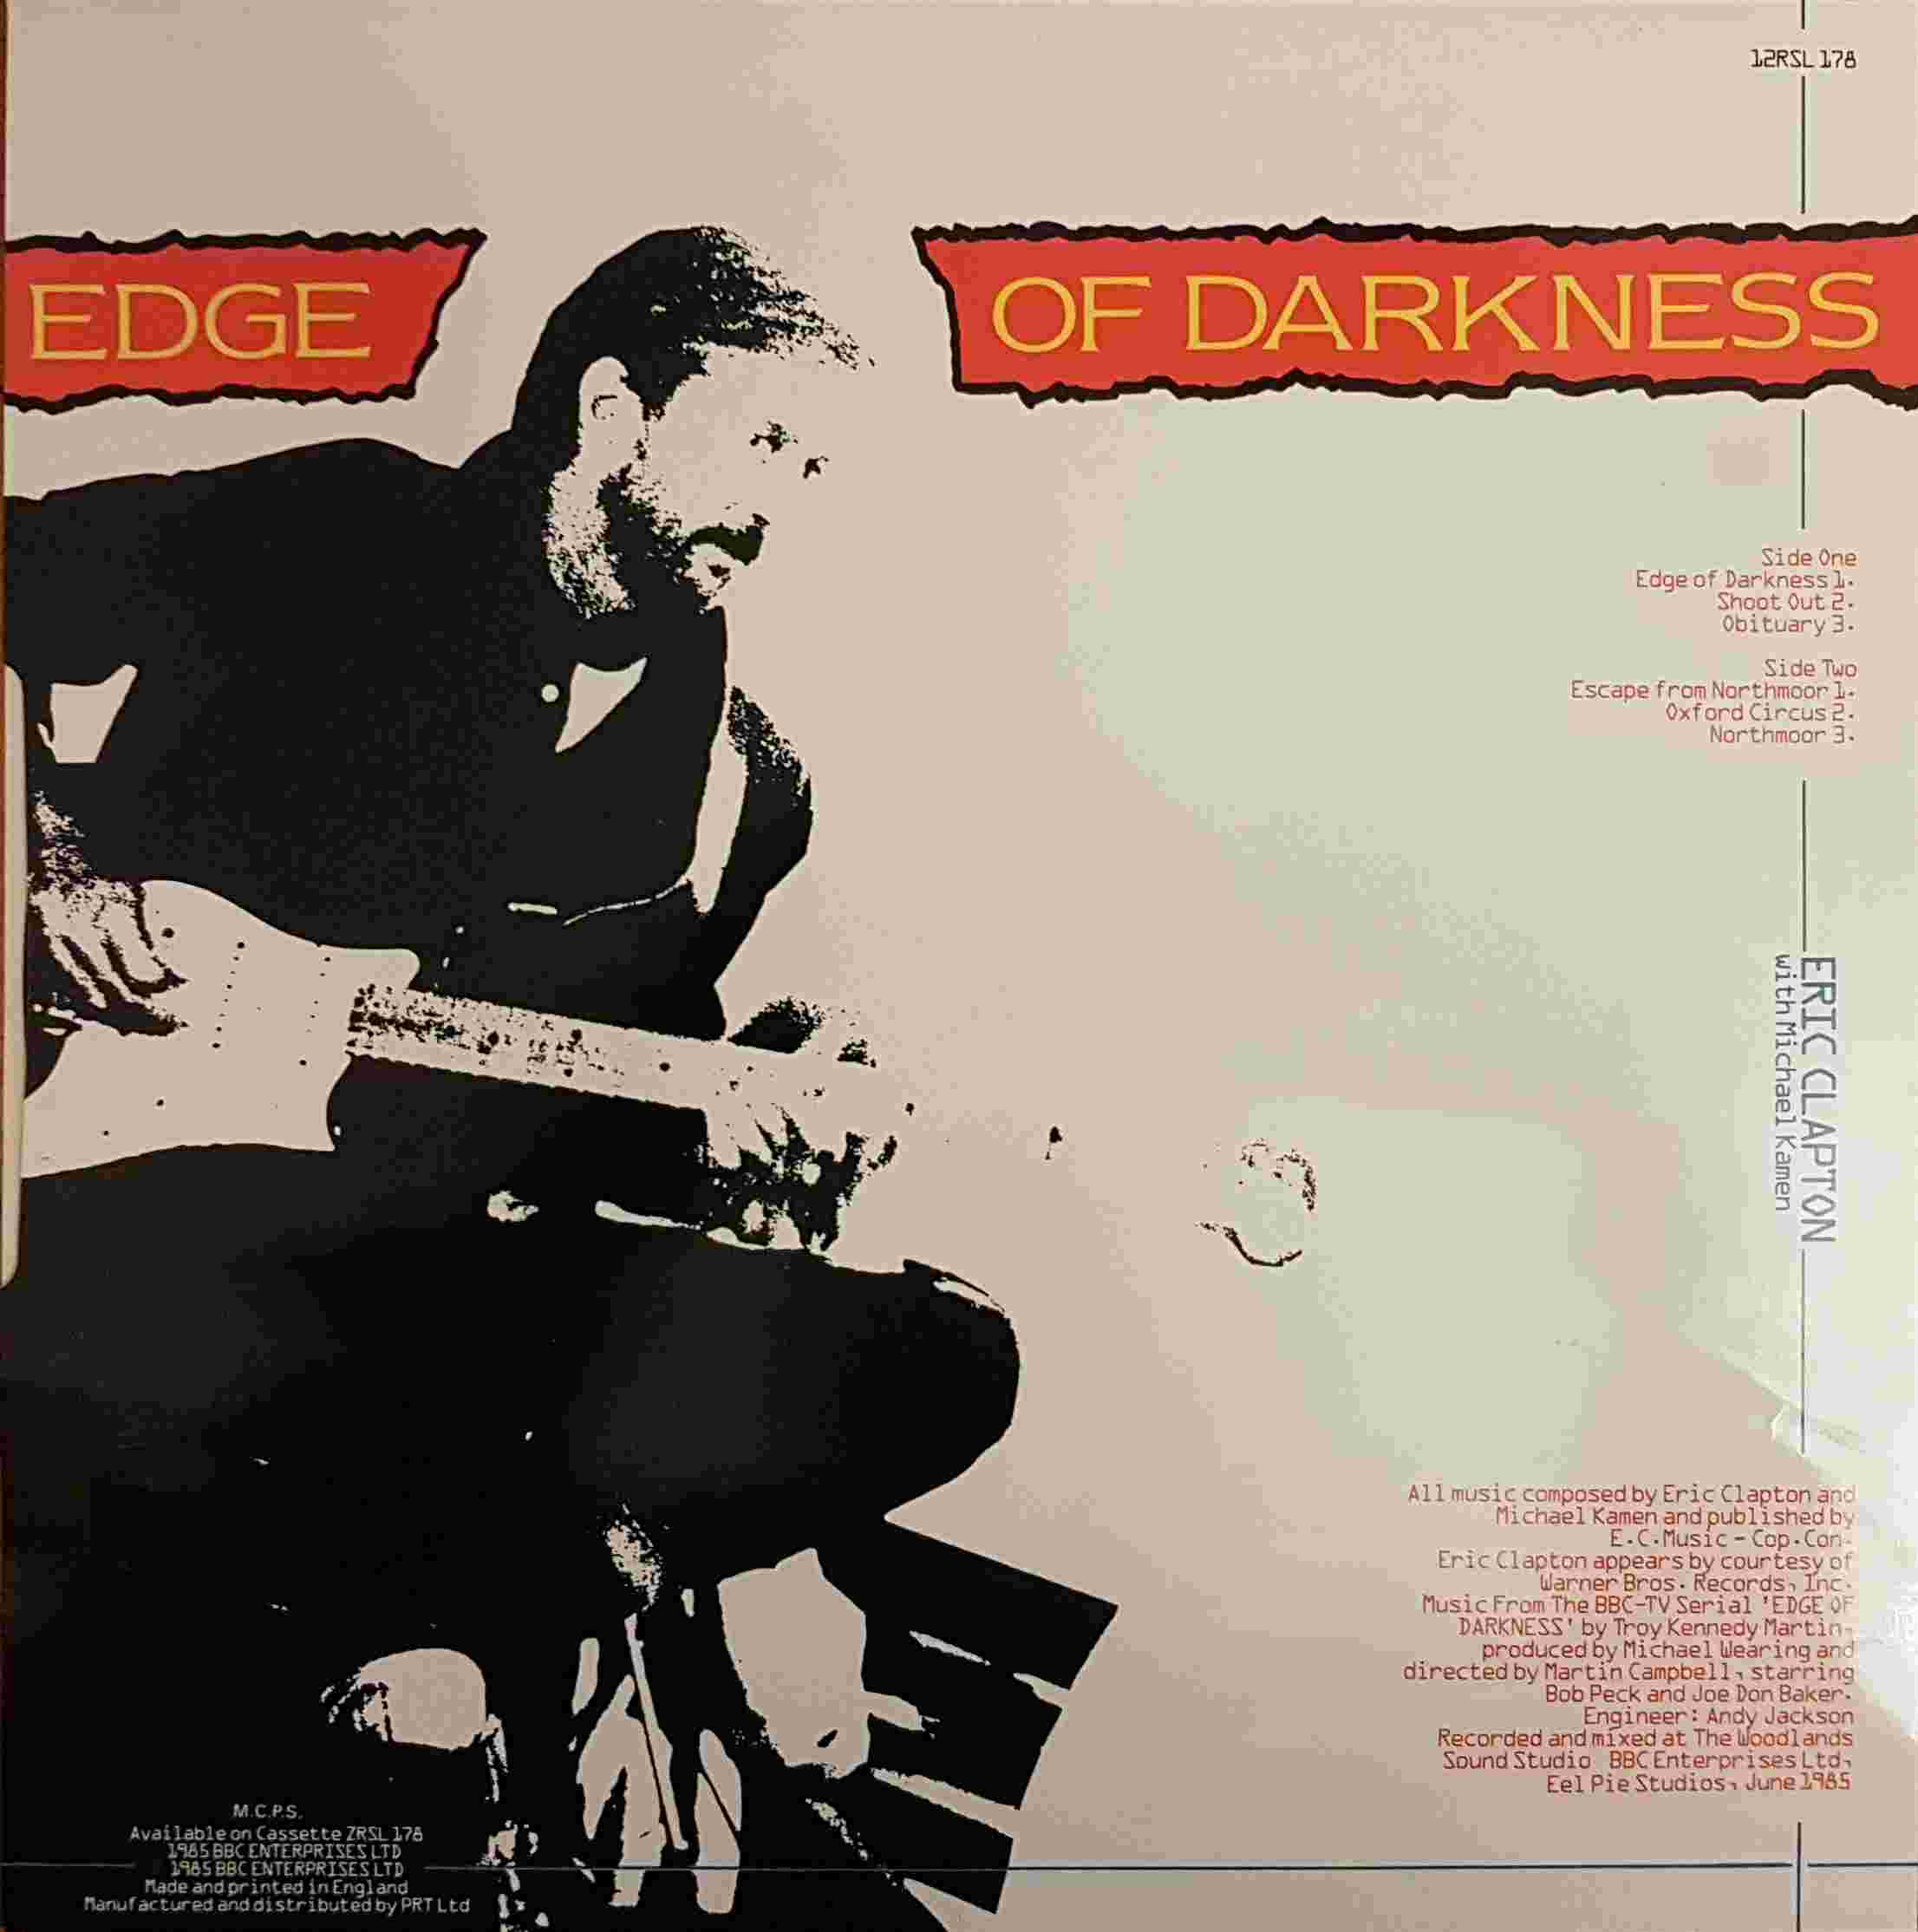 Picture of 12 RSL 178 Edge of darkness by artist Eric Clapton / Mike Kamen from the BBC records and Tapes library